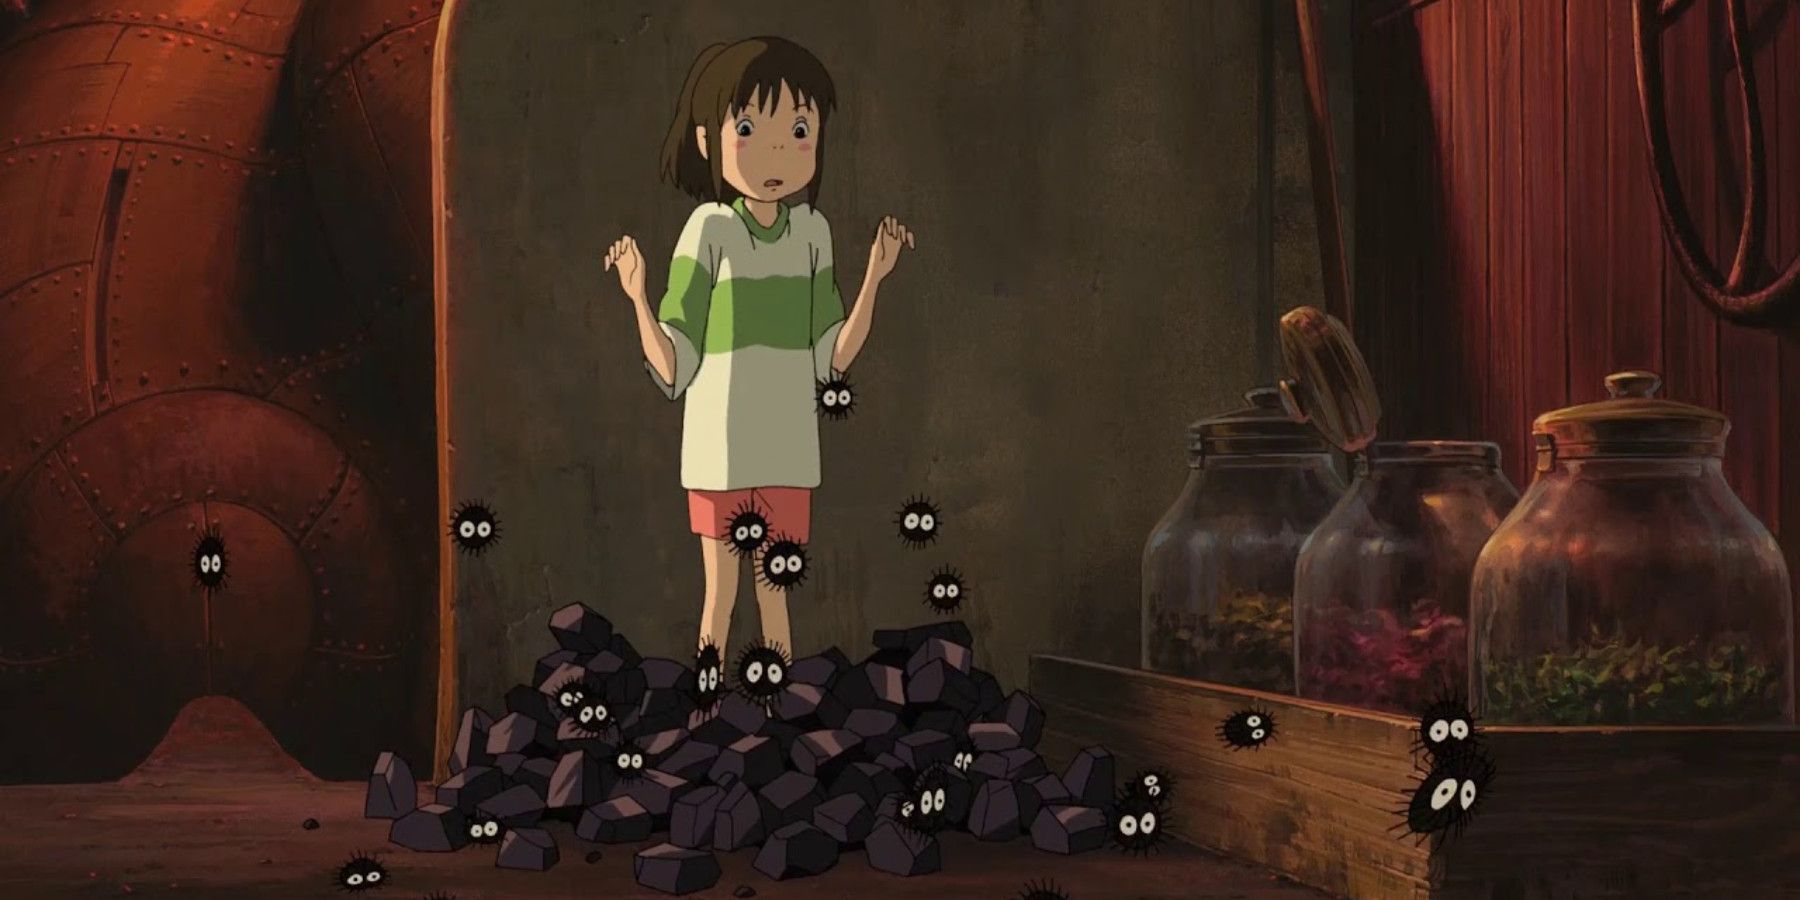 Chihiro surrounded by Soot Sprites in Spirited Away